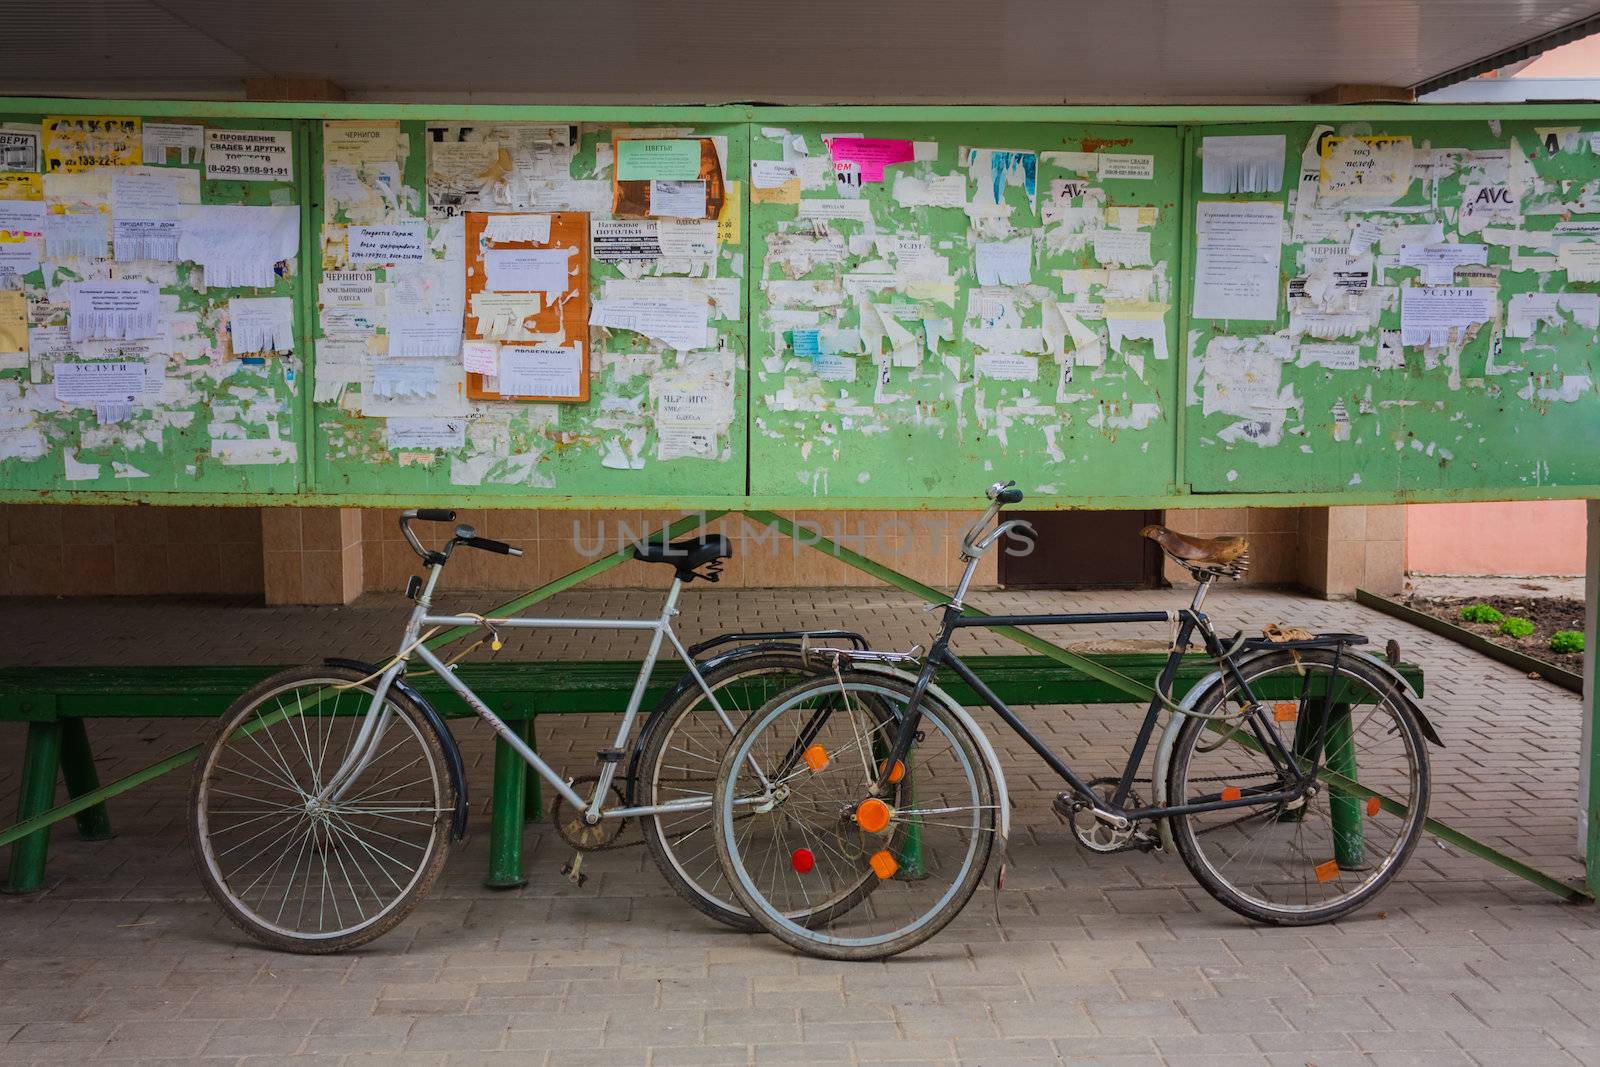 Two Old Bicycle Leaning Against A Bulletin Board On The Street. Belarus, Dobrush